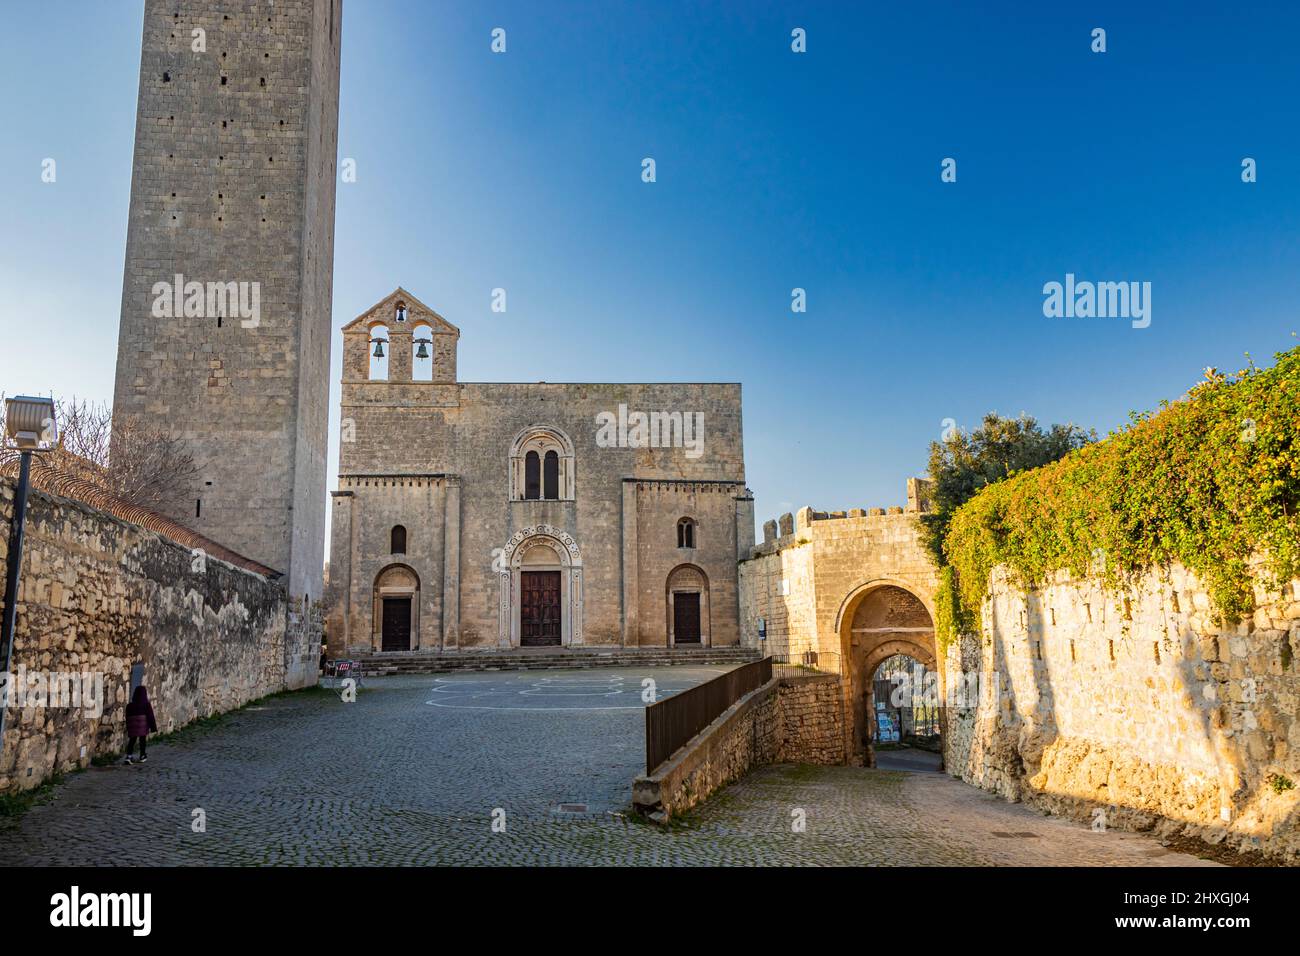 The village of Tarquinia, Viterbo, Lazio, Italy - The tower and facade of the Church of Santa Maria in Castello, in Romanesque style. Three arched doo Stock Photo